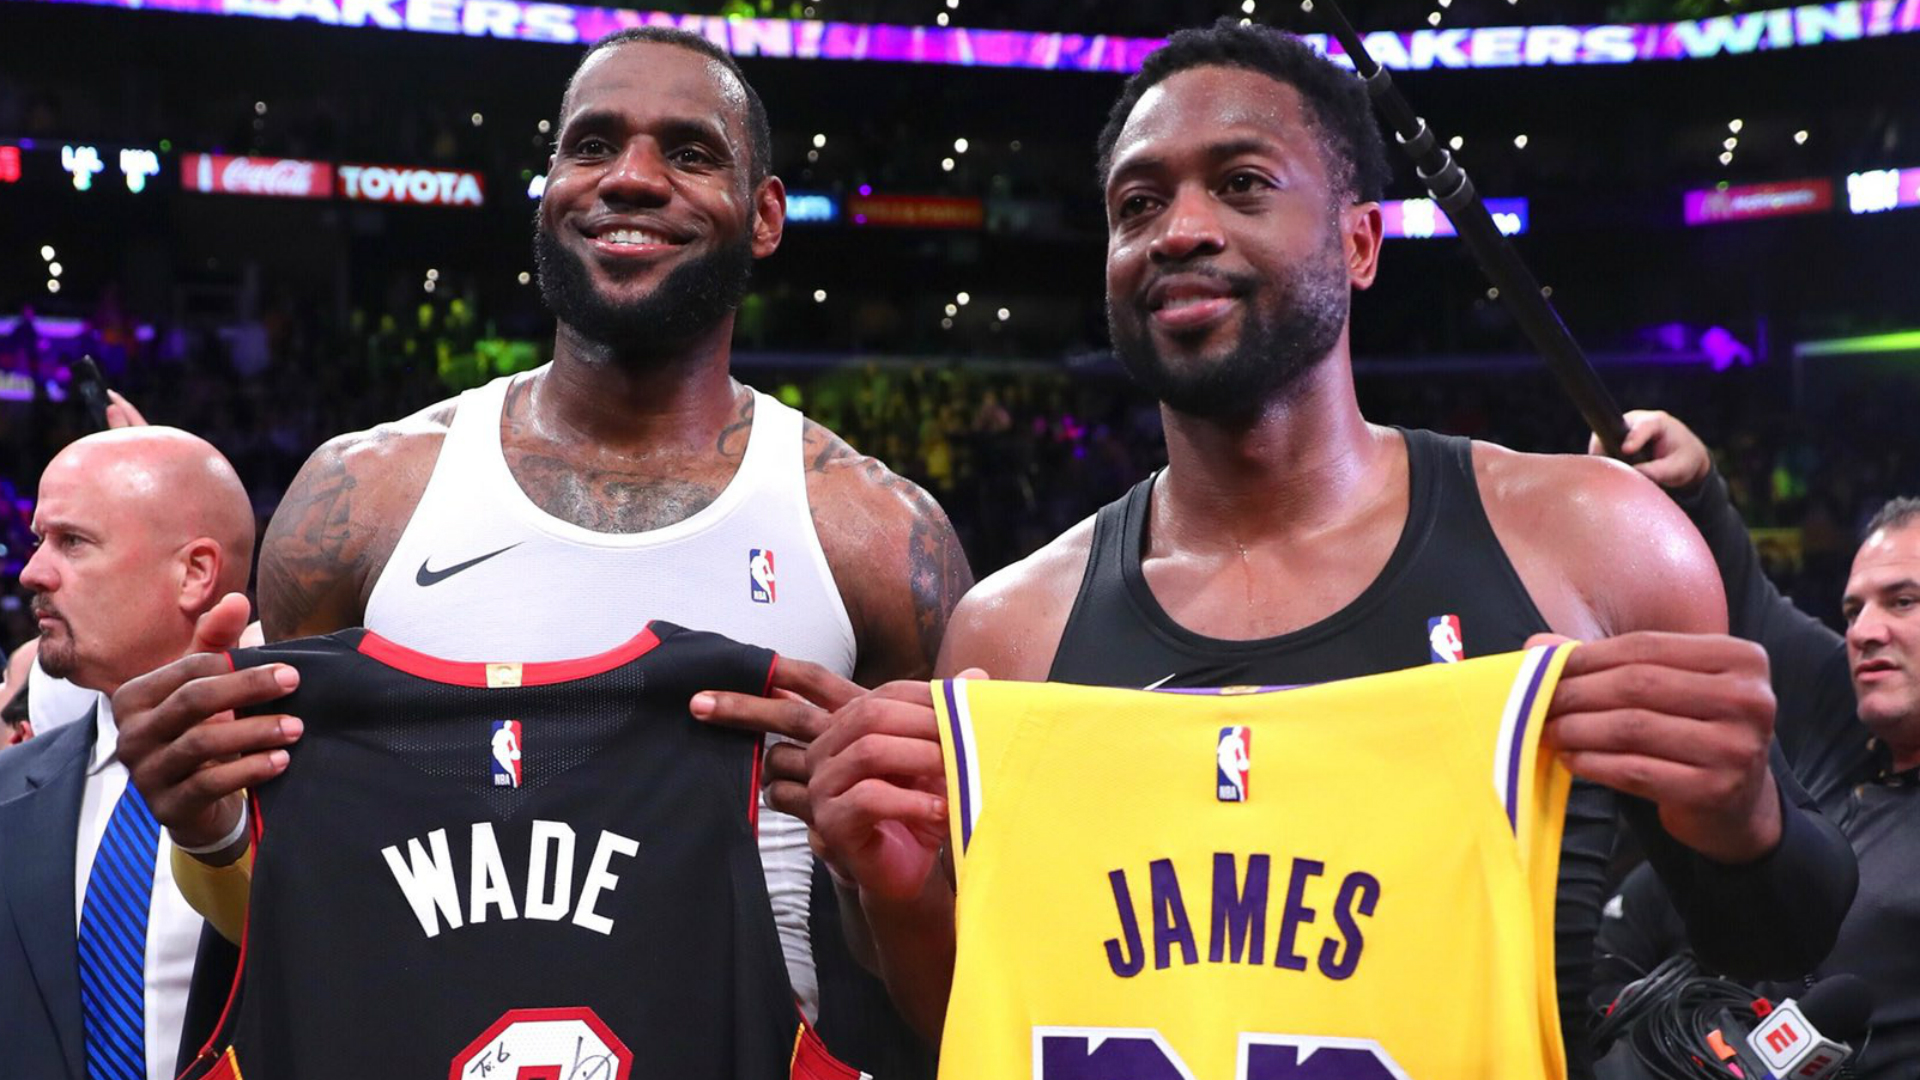 In their final matchup, LeBron James' Los Angeles Lakers beat Dwyane Wade and the Miami Heat.